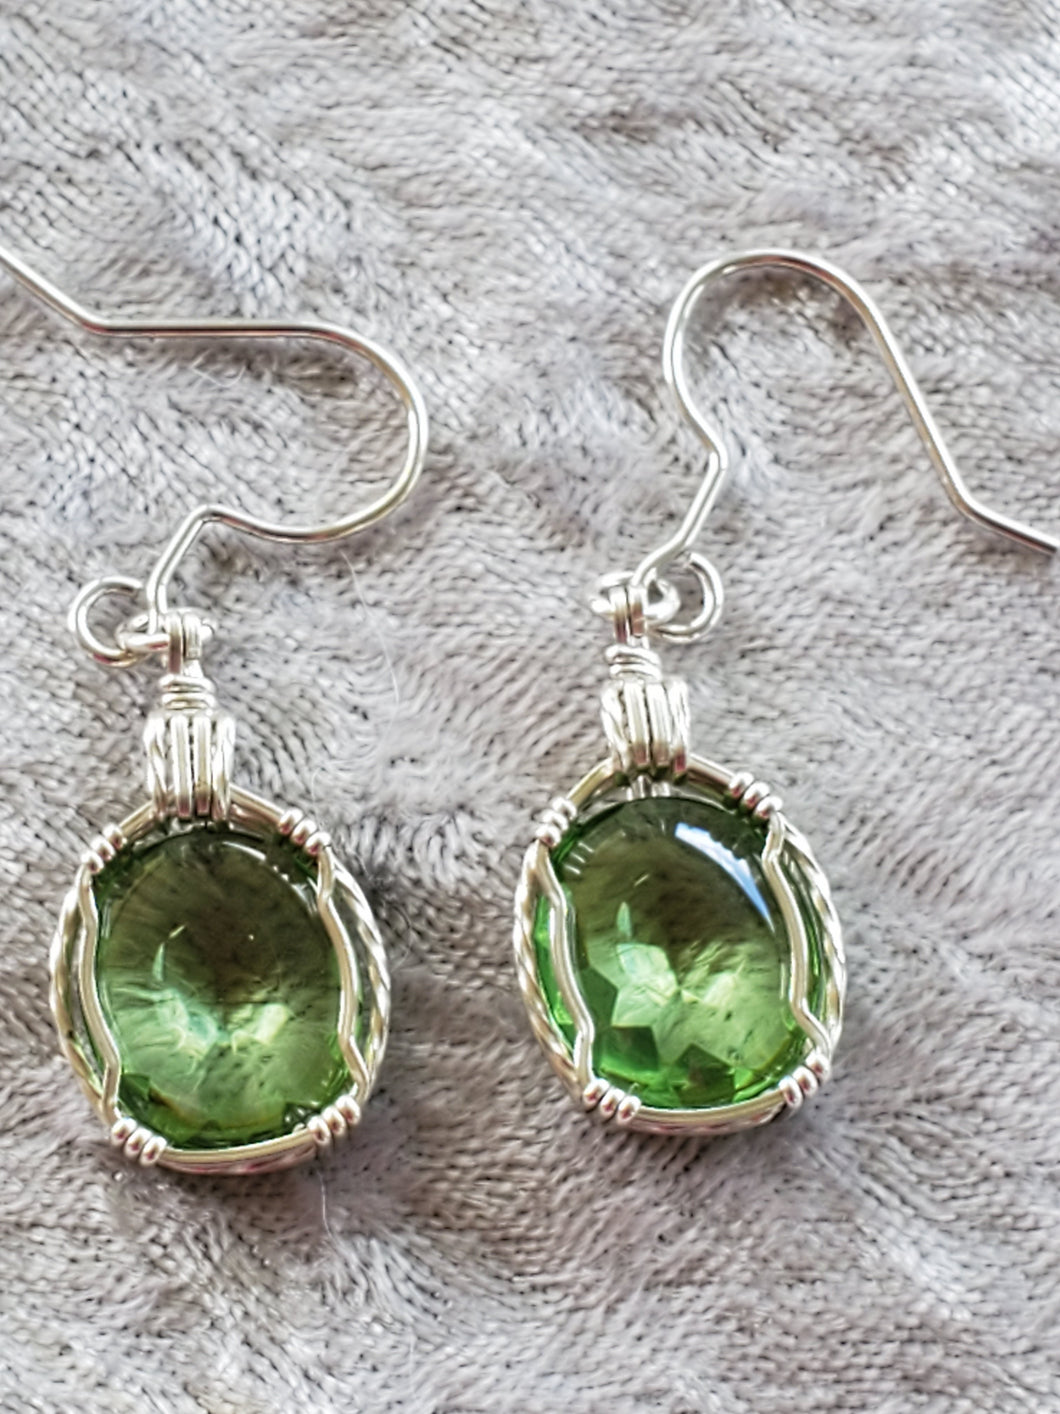 Custom Wire Wrapped Faceted Simulated Peridot (Corundum) Earrings Sterling Silver